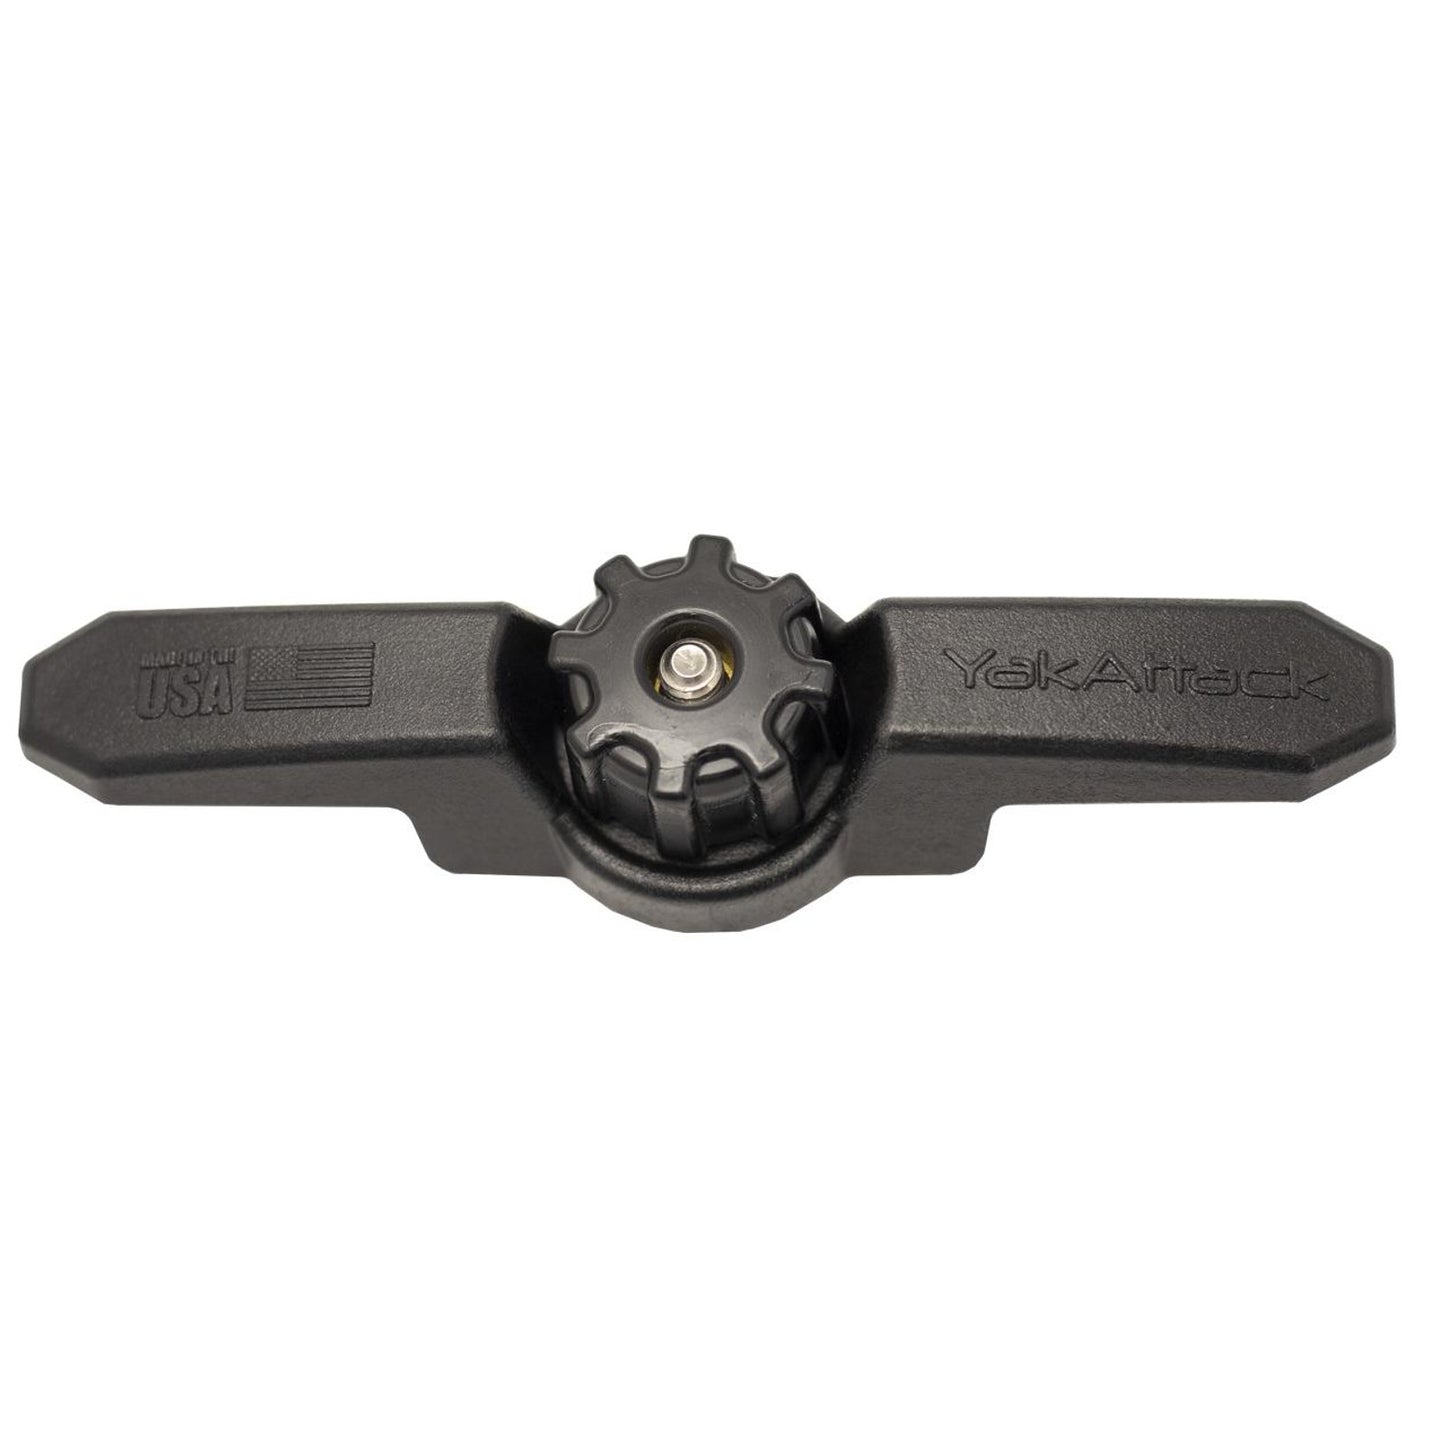 YakAttack GT Cleat XL, Kayak Track Mount Line Cleat